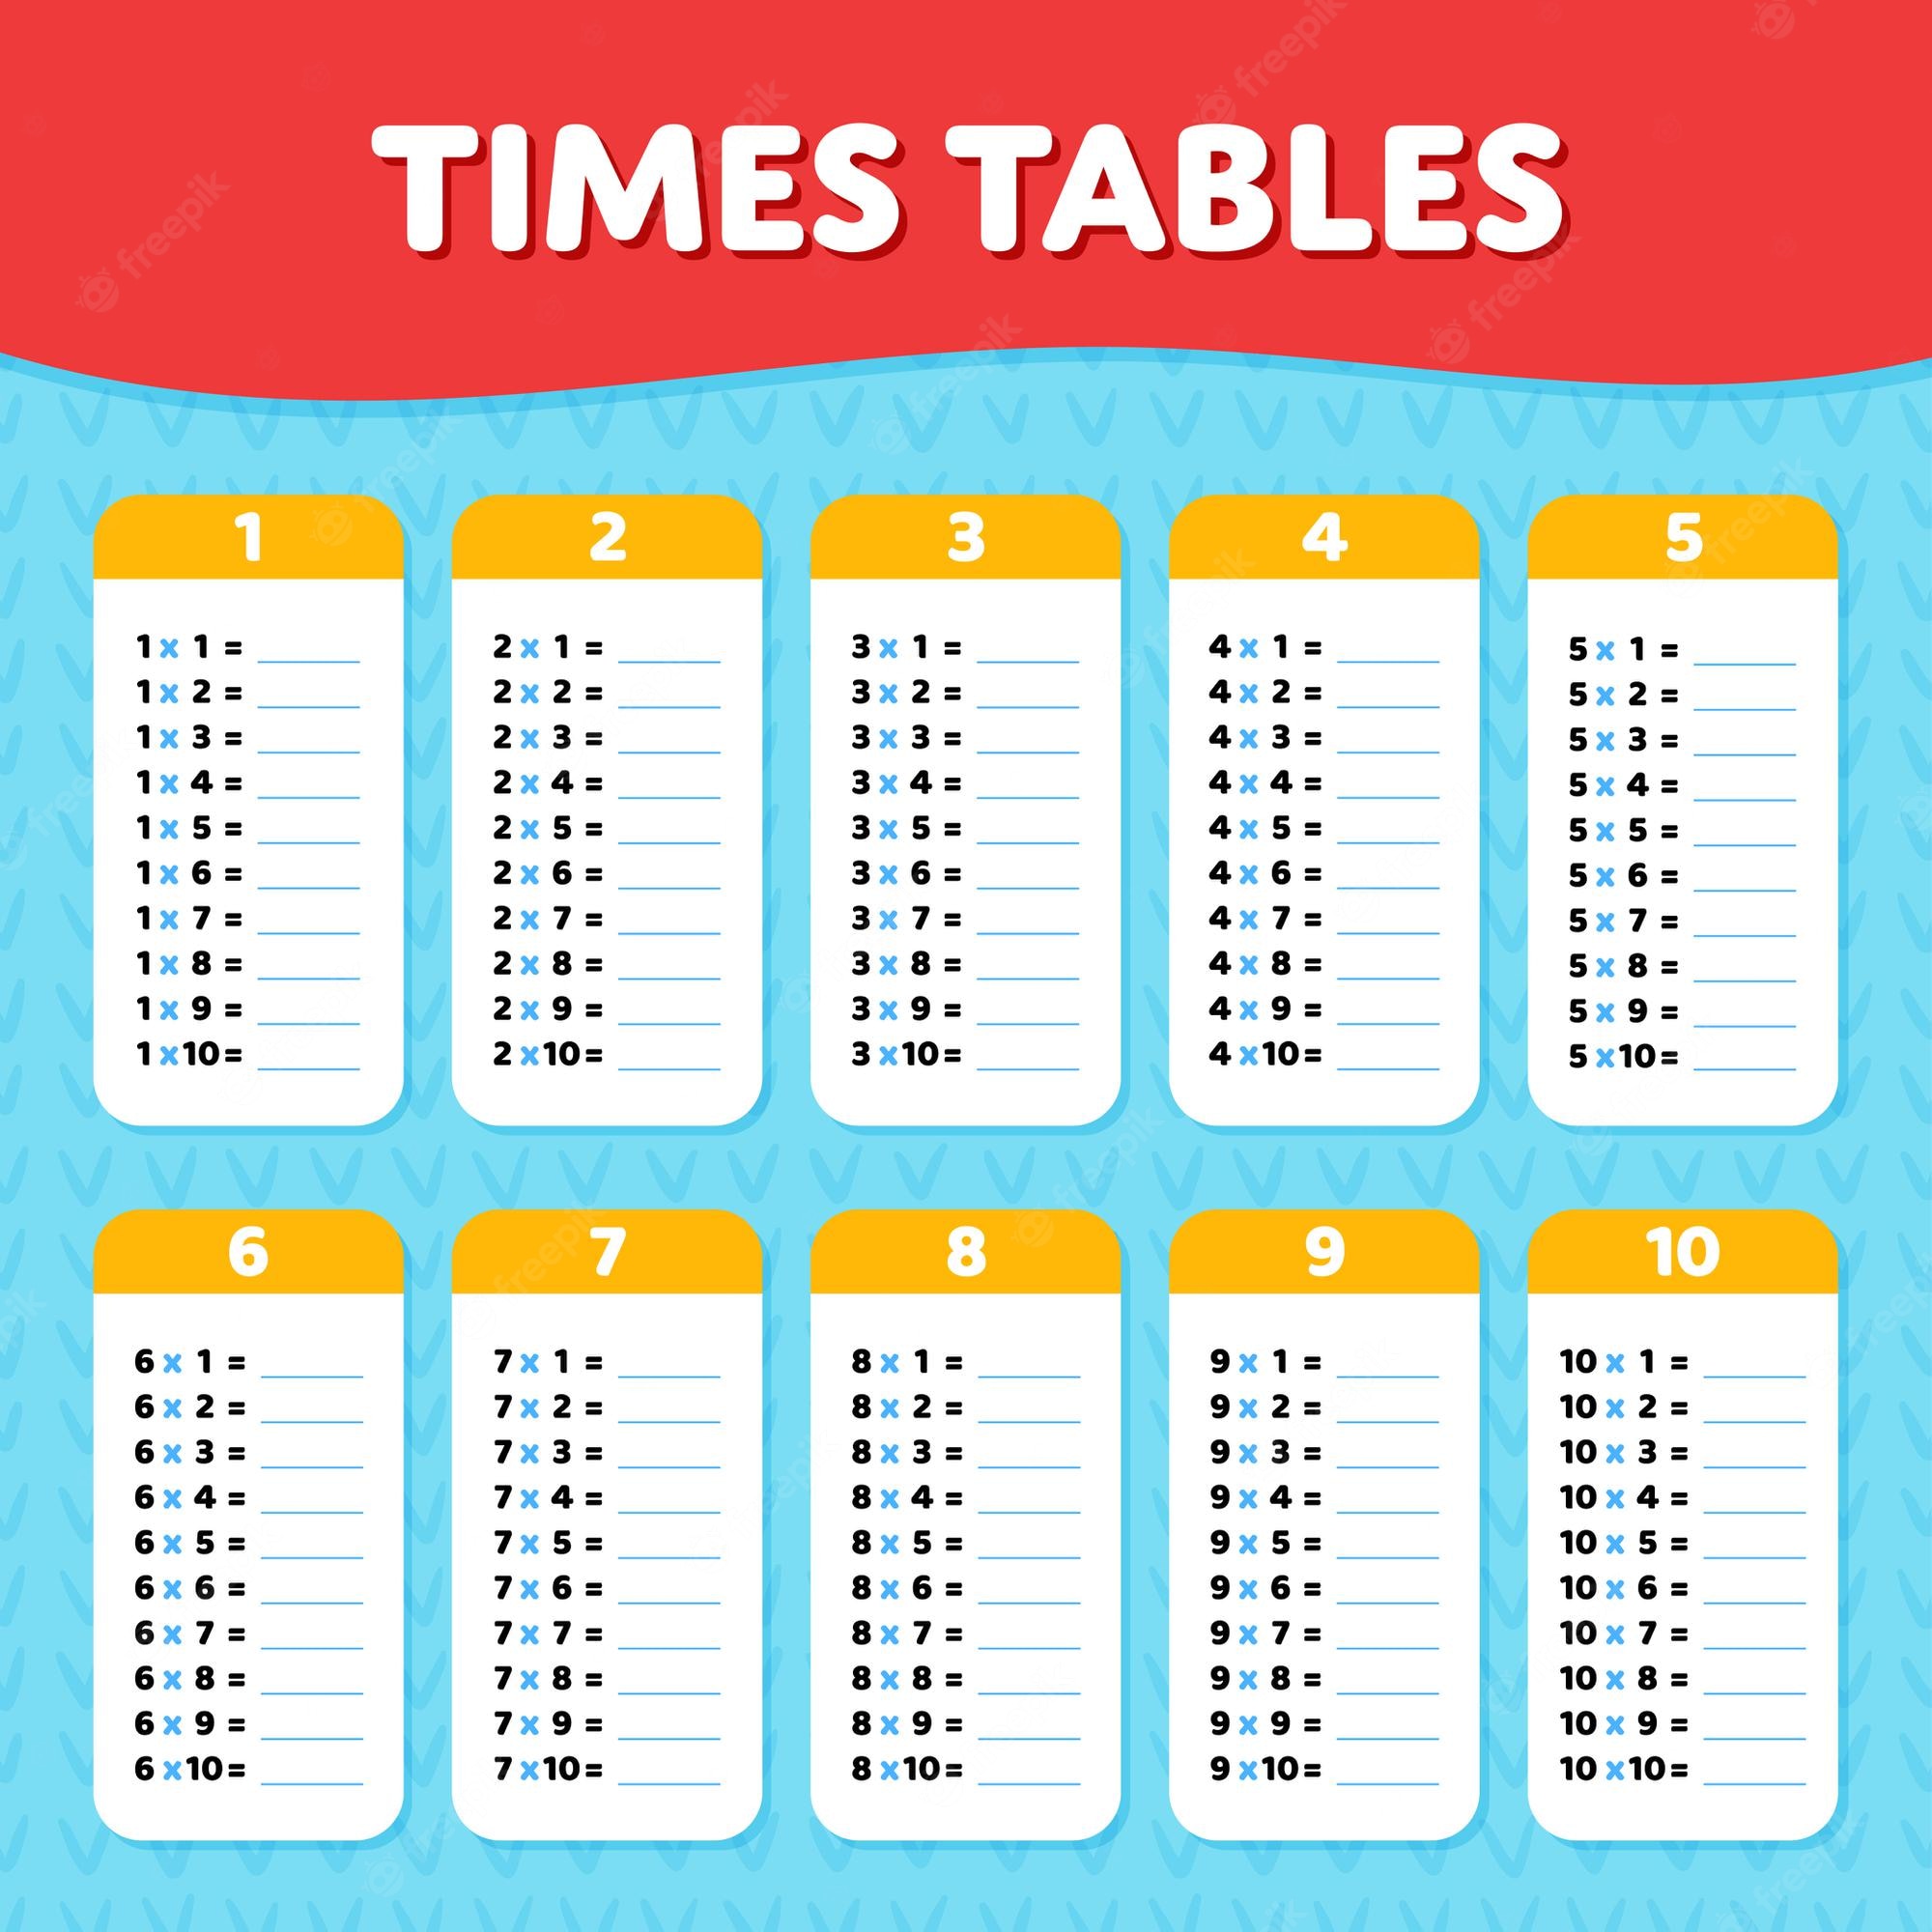 Math times tables Image. Free Vectors, & PSD